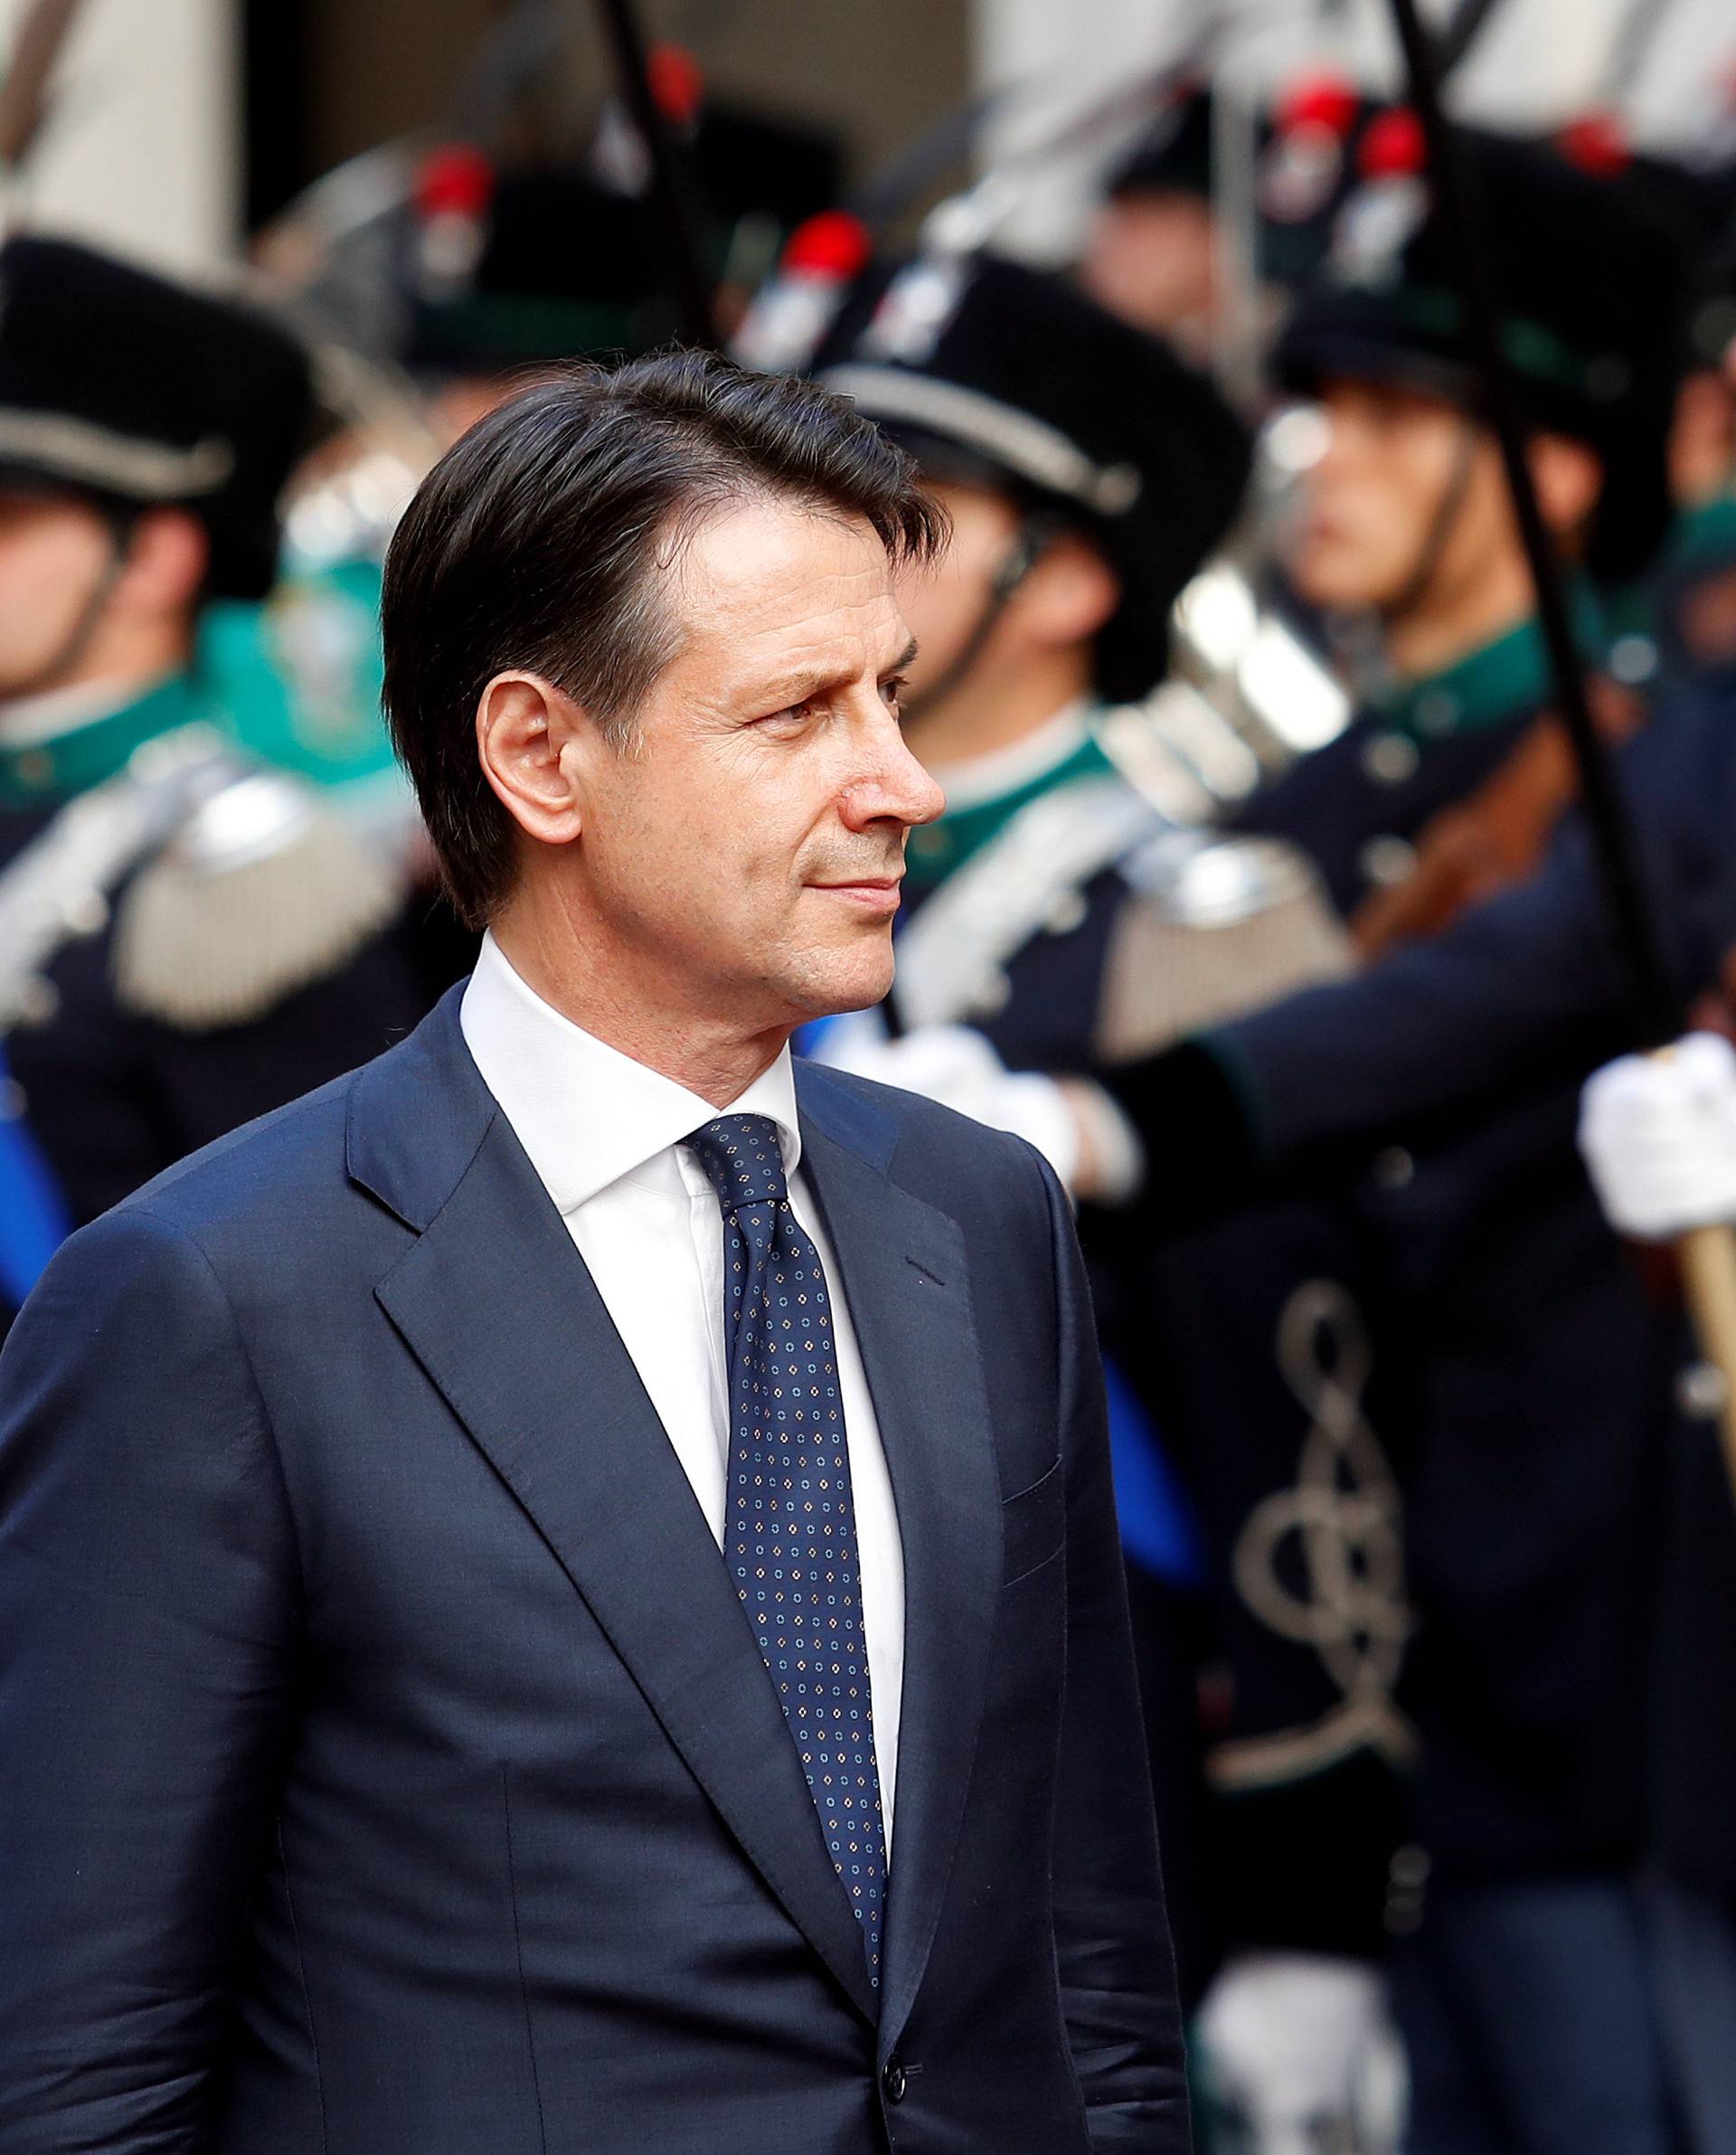 Italy's Prime Minister Giuseppe Conte reviews the guard of honour at Chigi palace in Rome